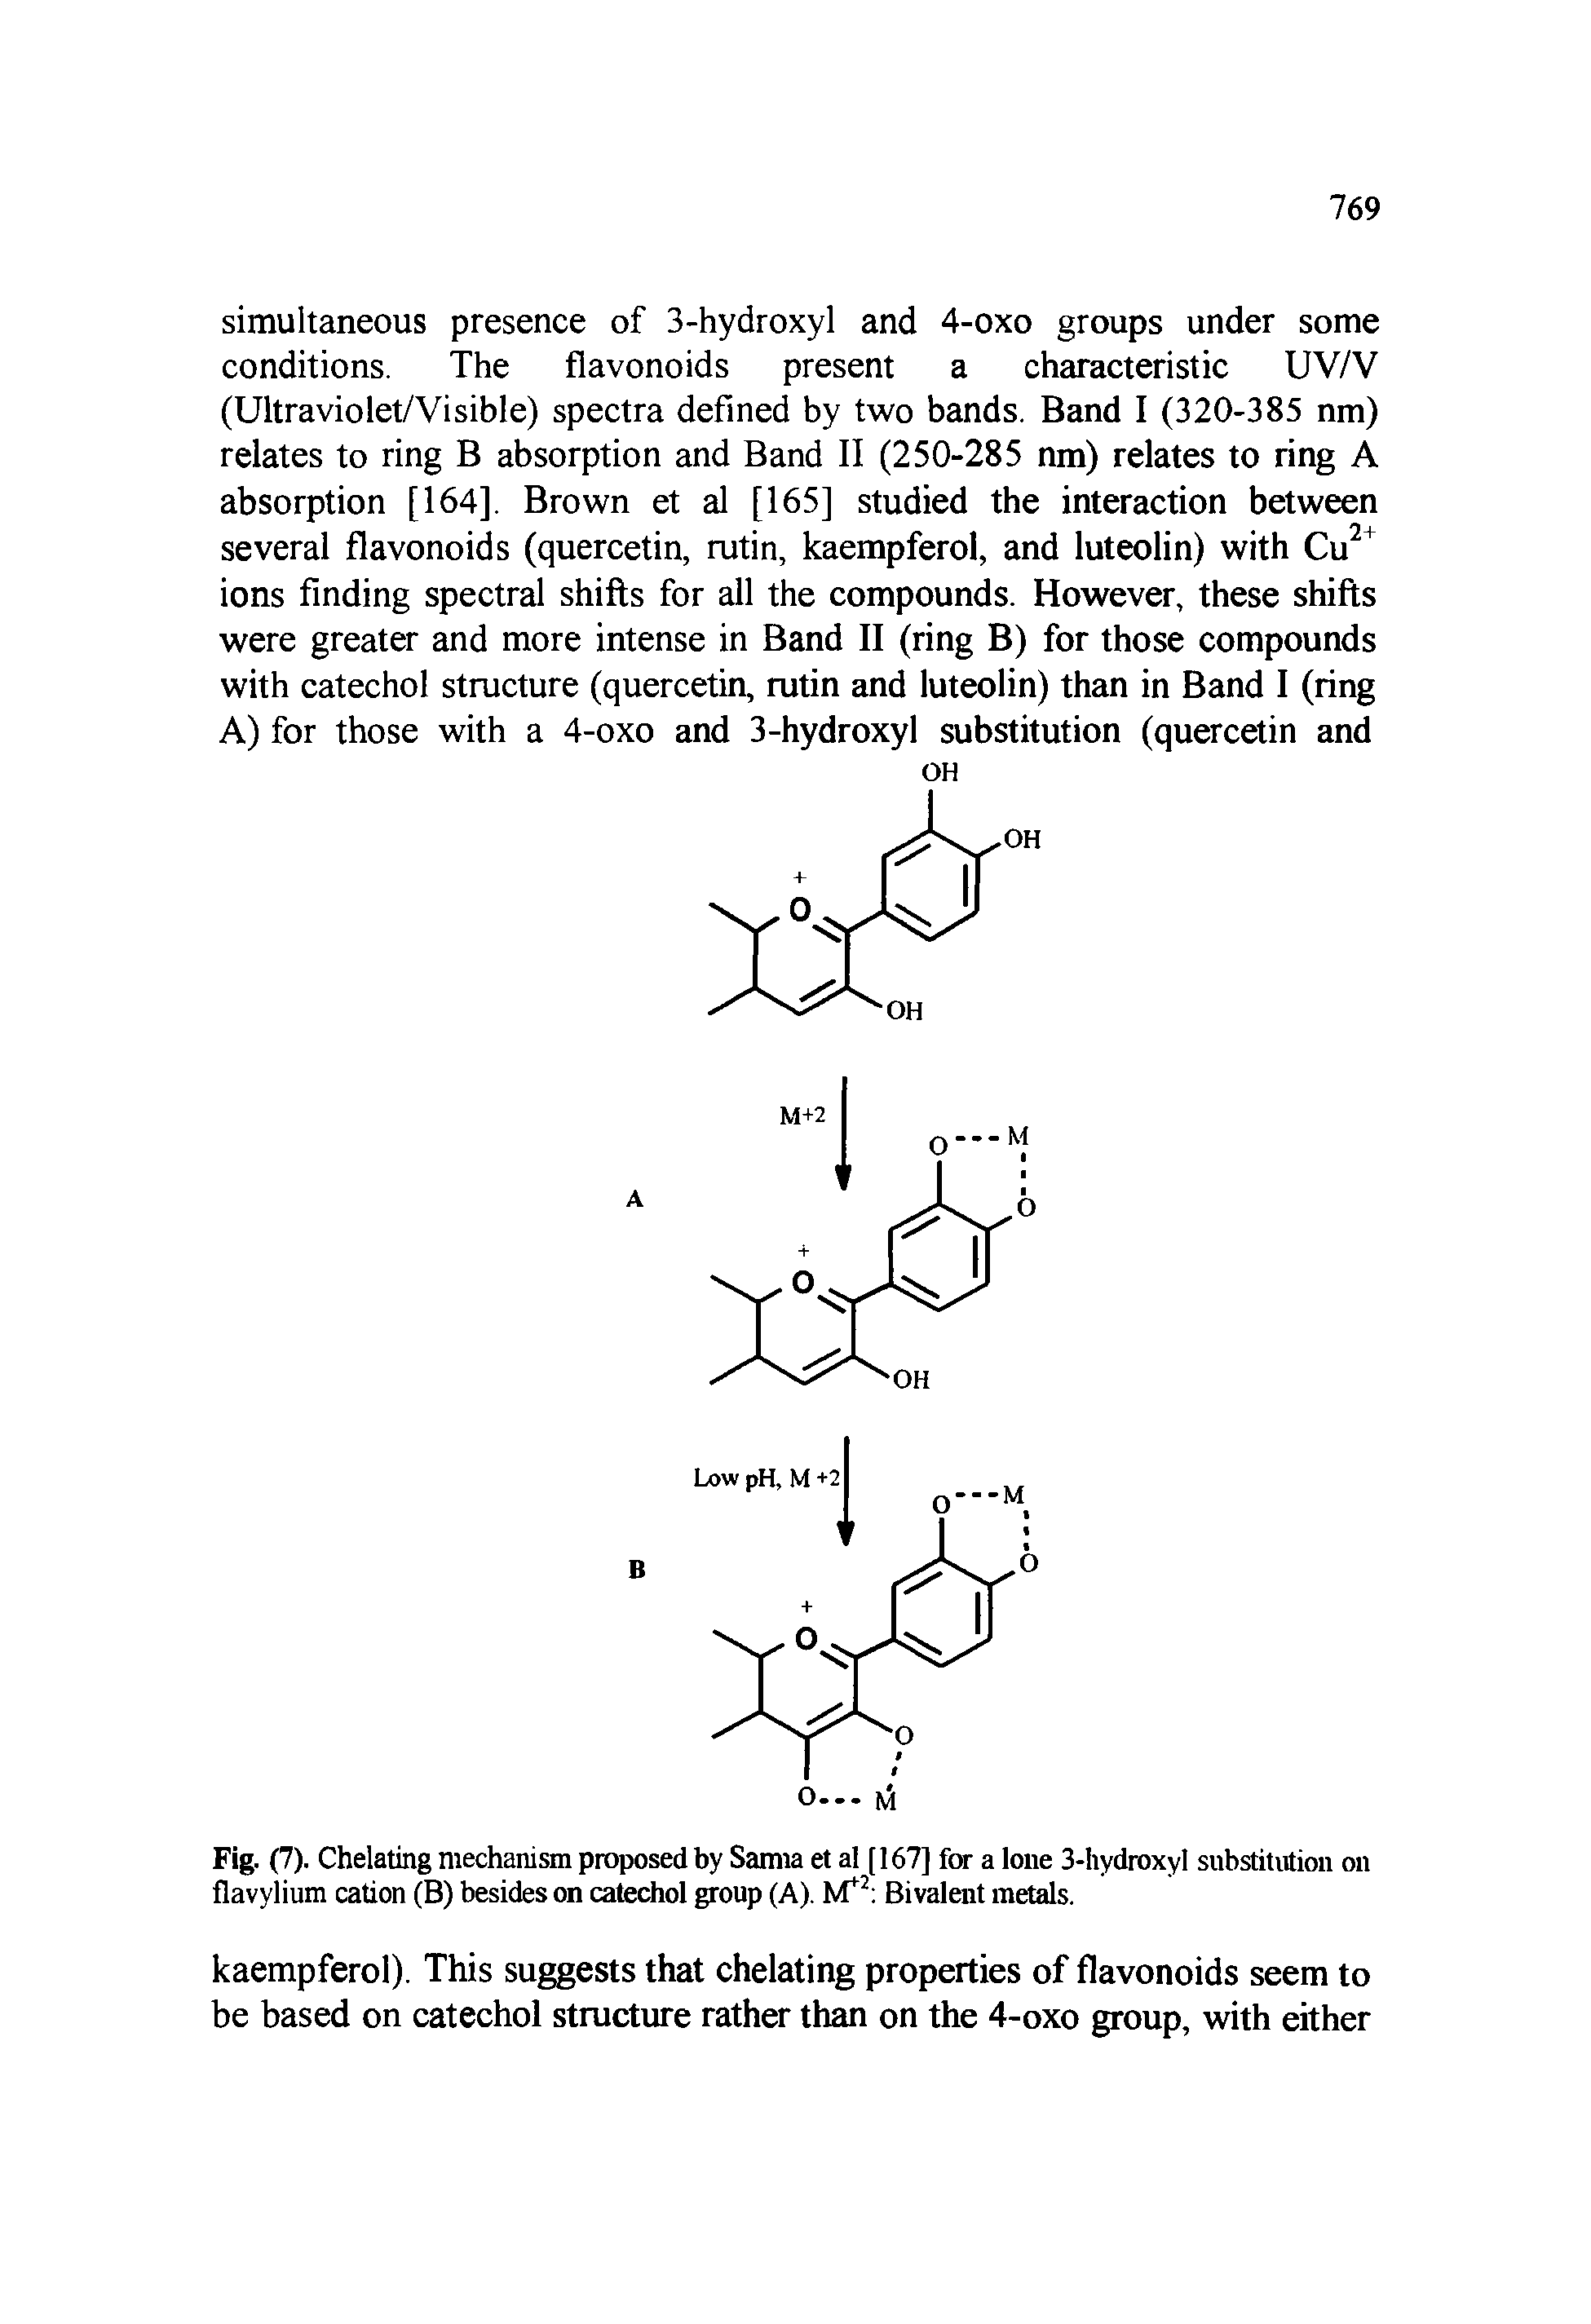 Fig. (7). Chelating mechanism proposed by Samia et al [167] for a lone 3-hydroxyl substitution on flavylium cation (B) besides on catechol group (A). M 2 Bivalent metals.